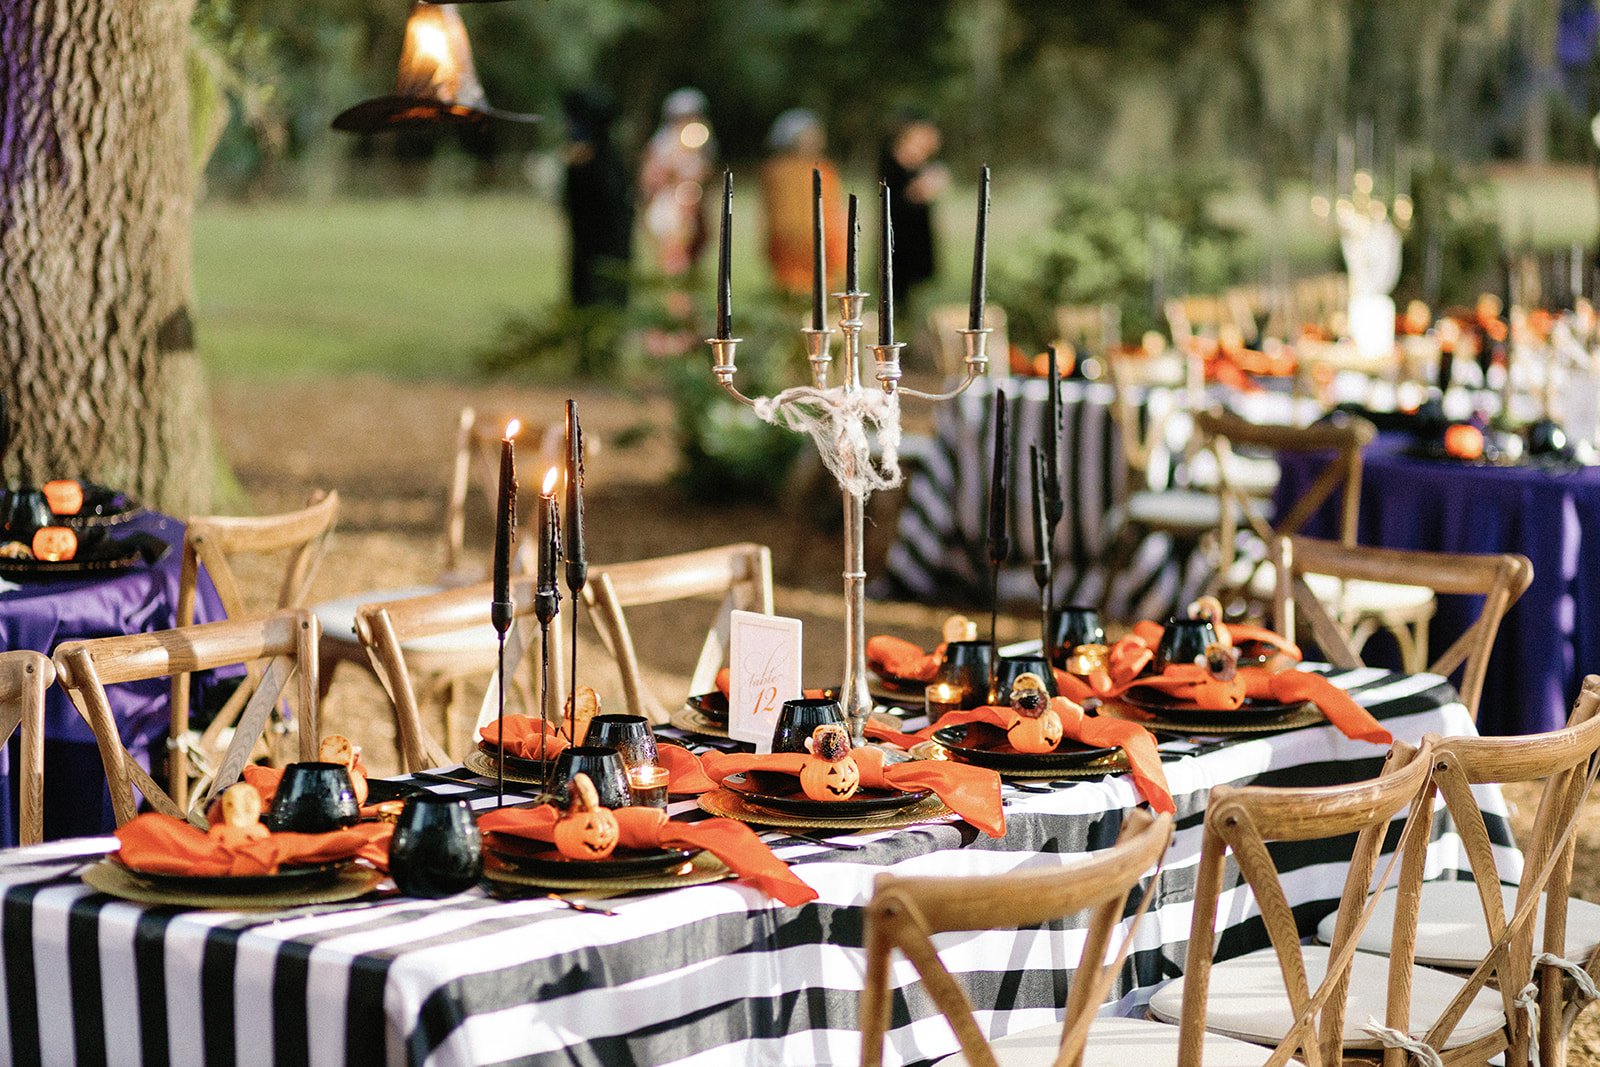 Table set for a Halloween party with a black and white striped tablecloth, orange accents and a small pumpkin at every place setting